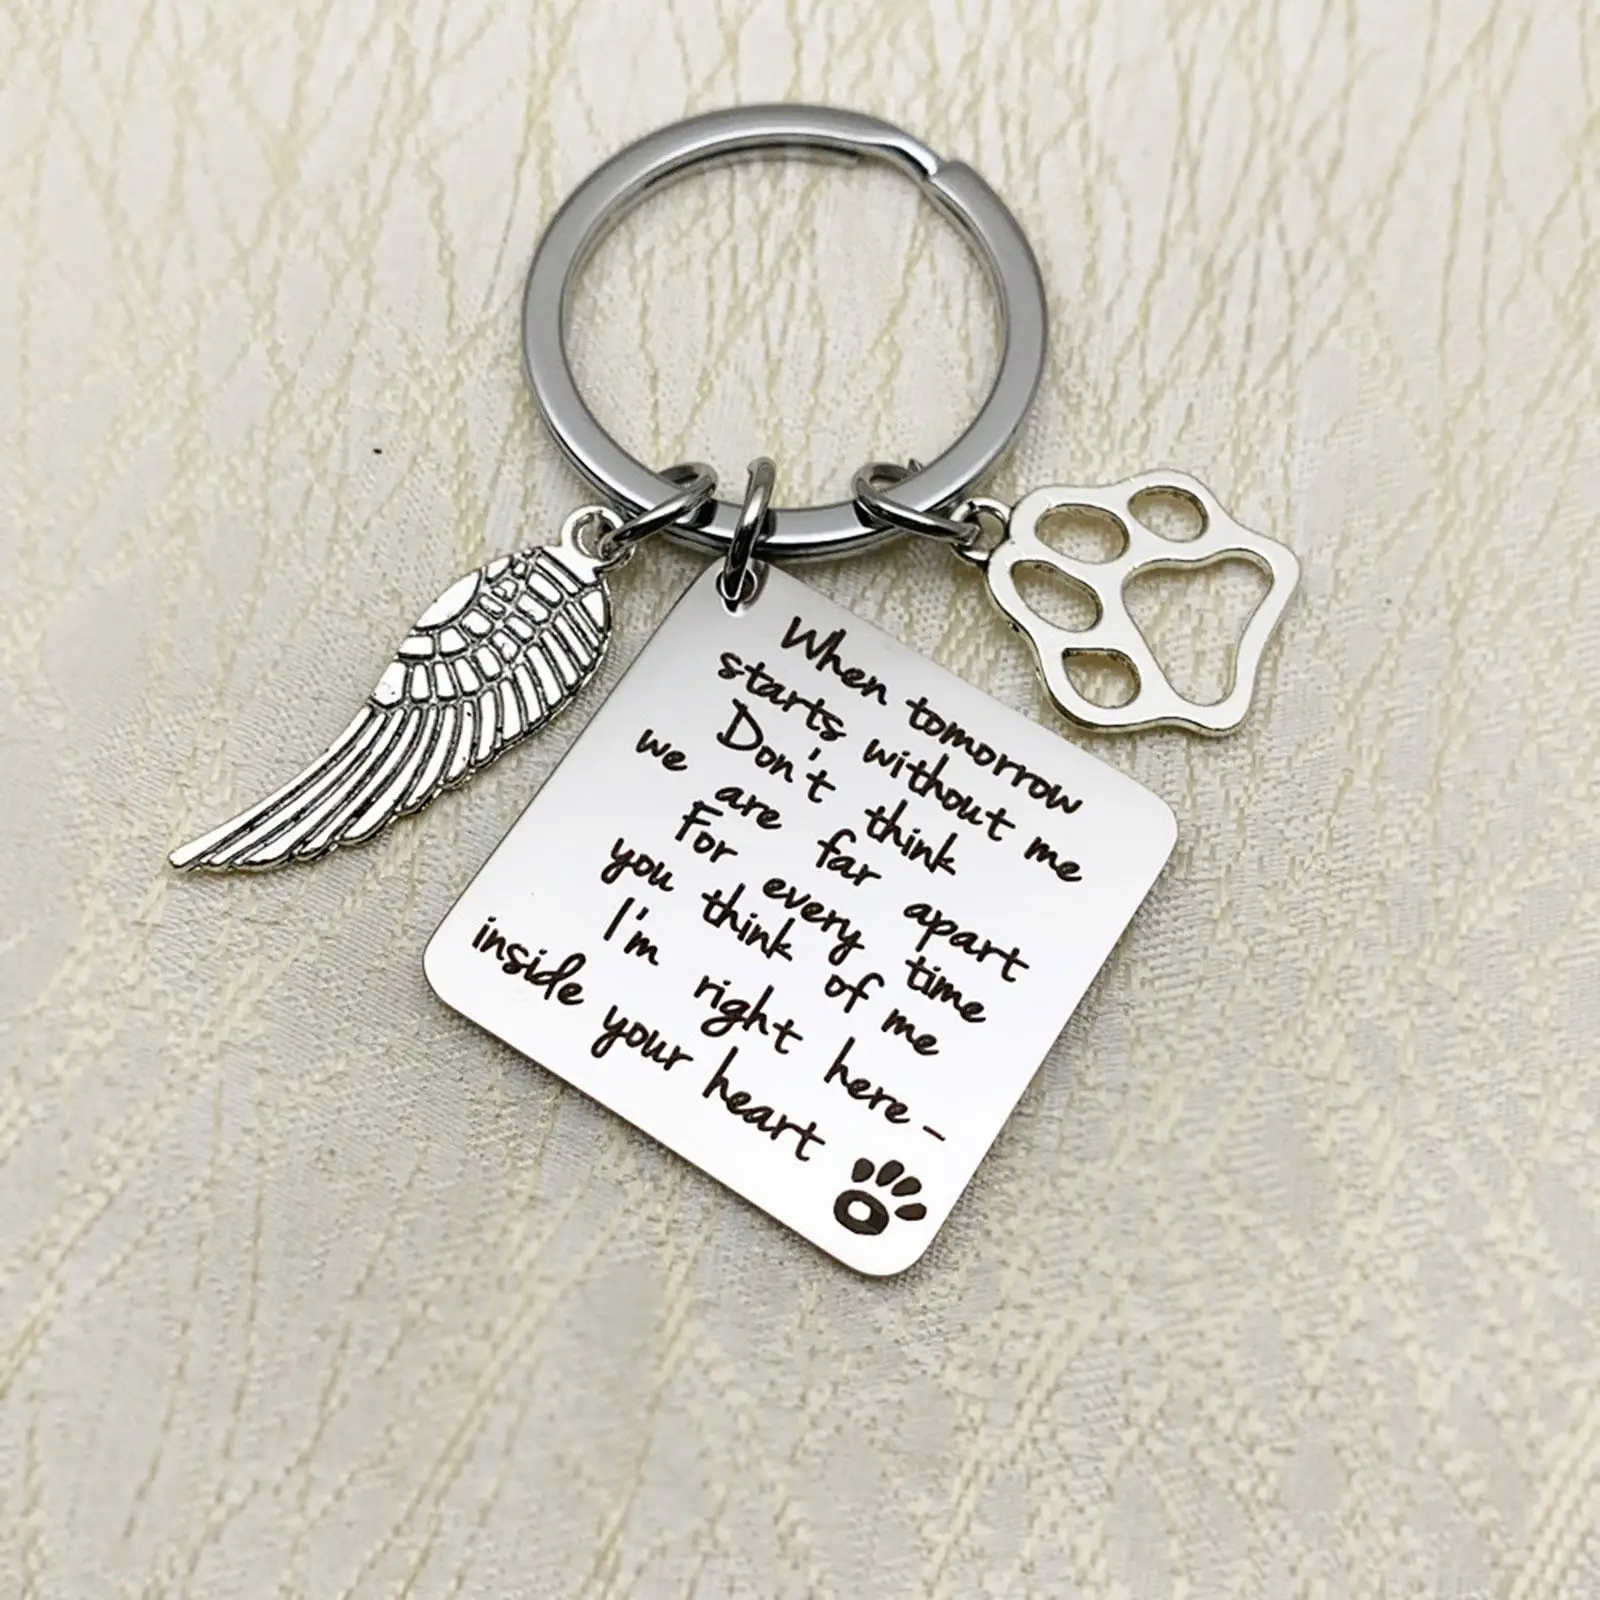 Pet Memorial Gifts Keychain for Dog Cat Pet Keychains Dog Cat Loss Gifts Keepsake Key Chain Loss of Dog Sympathy Gift